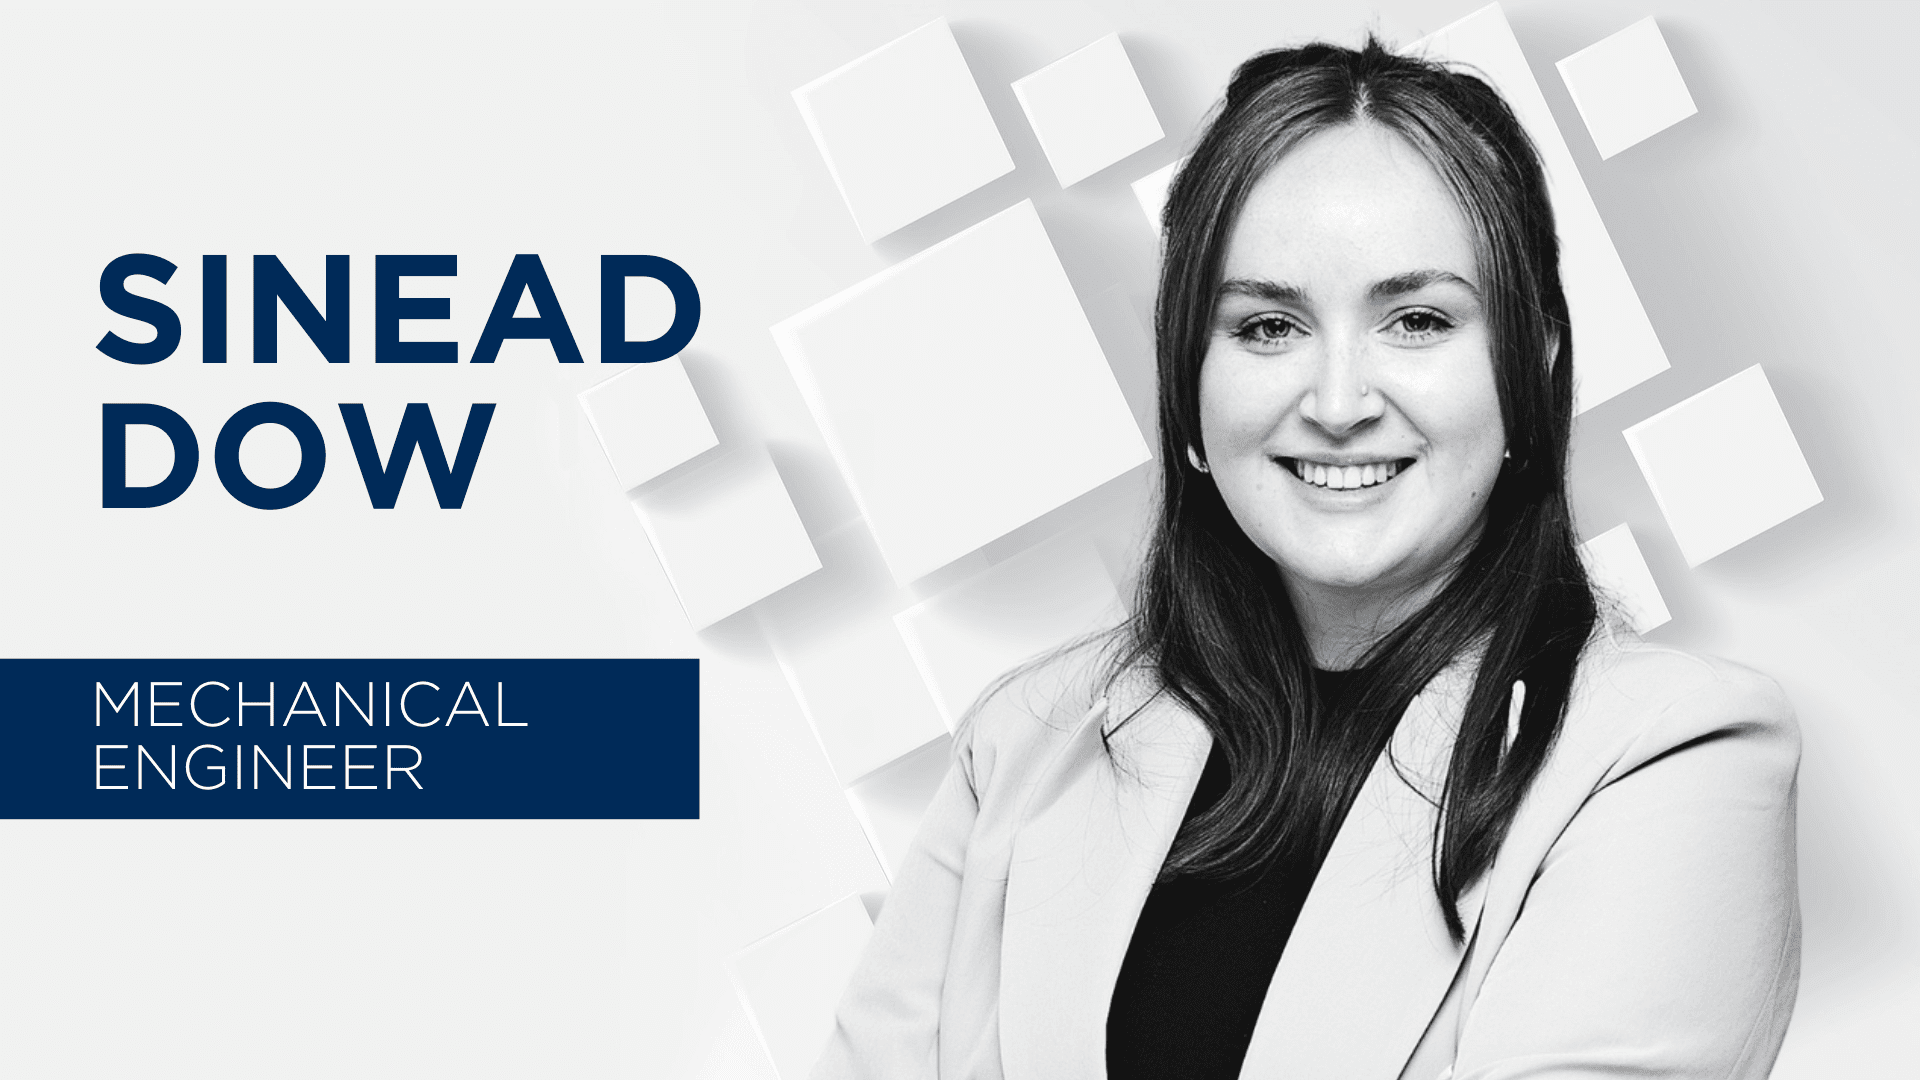 Meet the team Sinead Dow - featured image